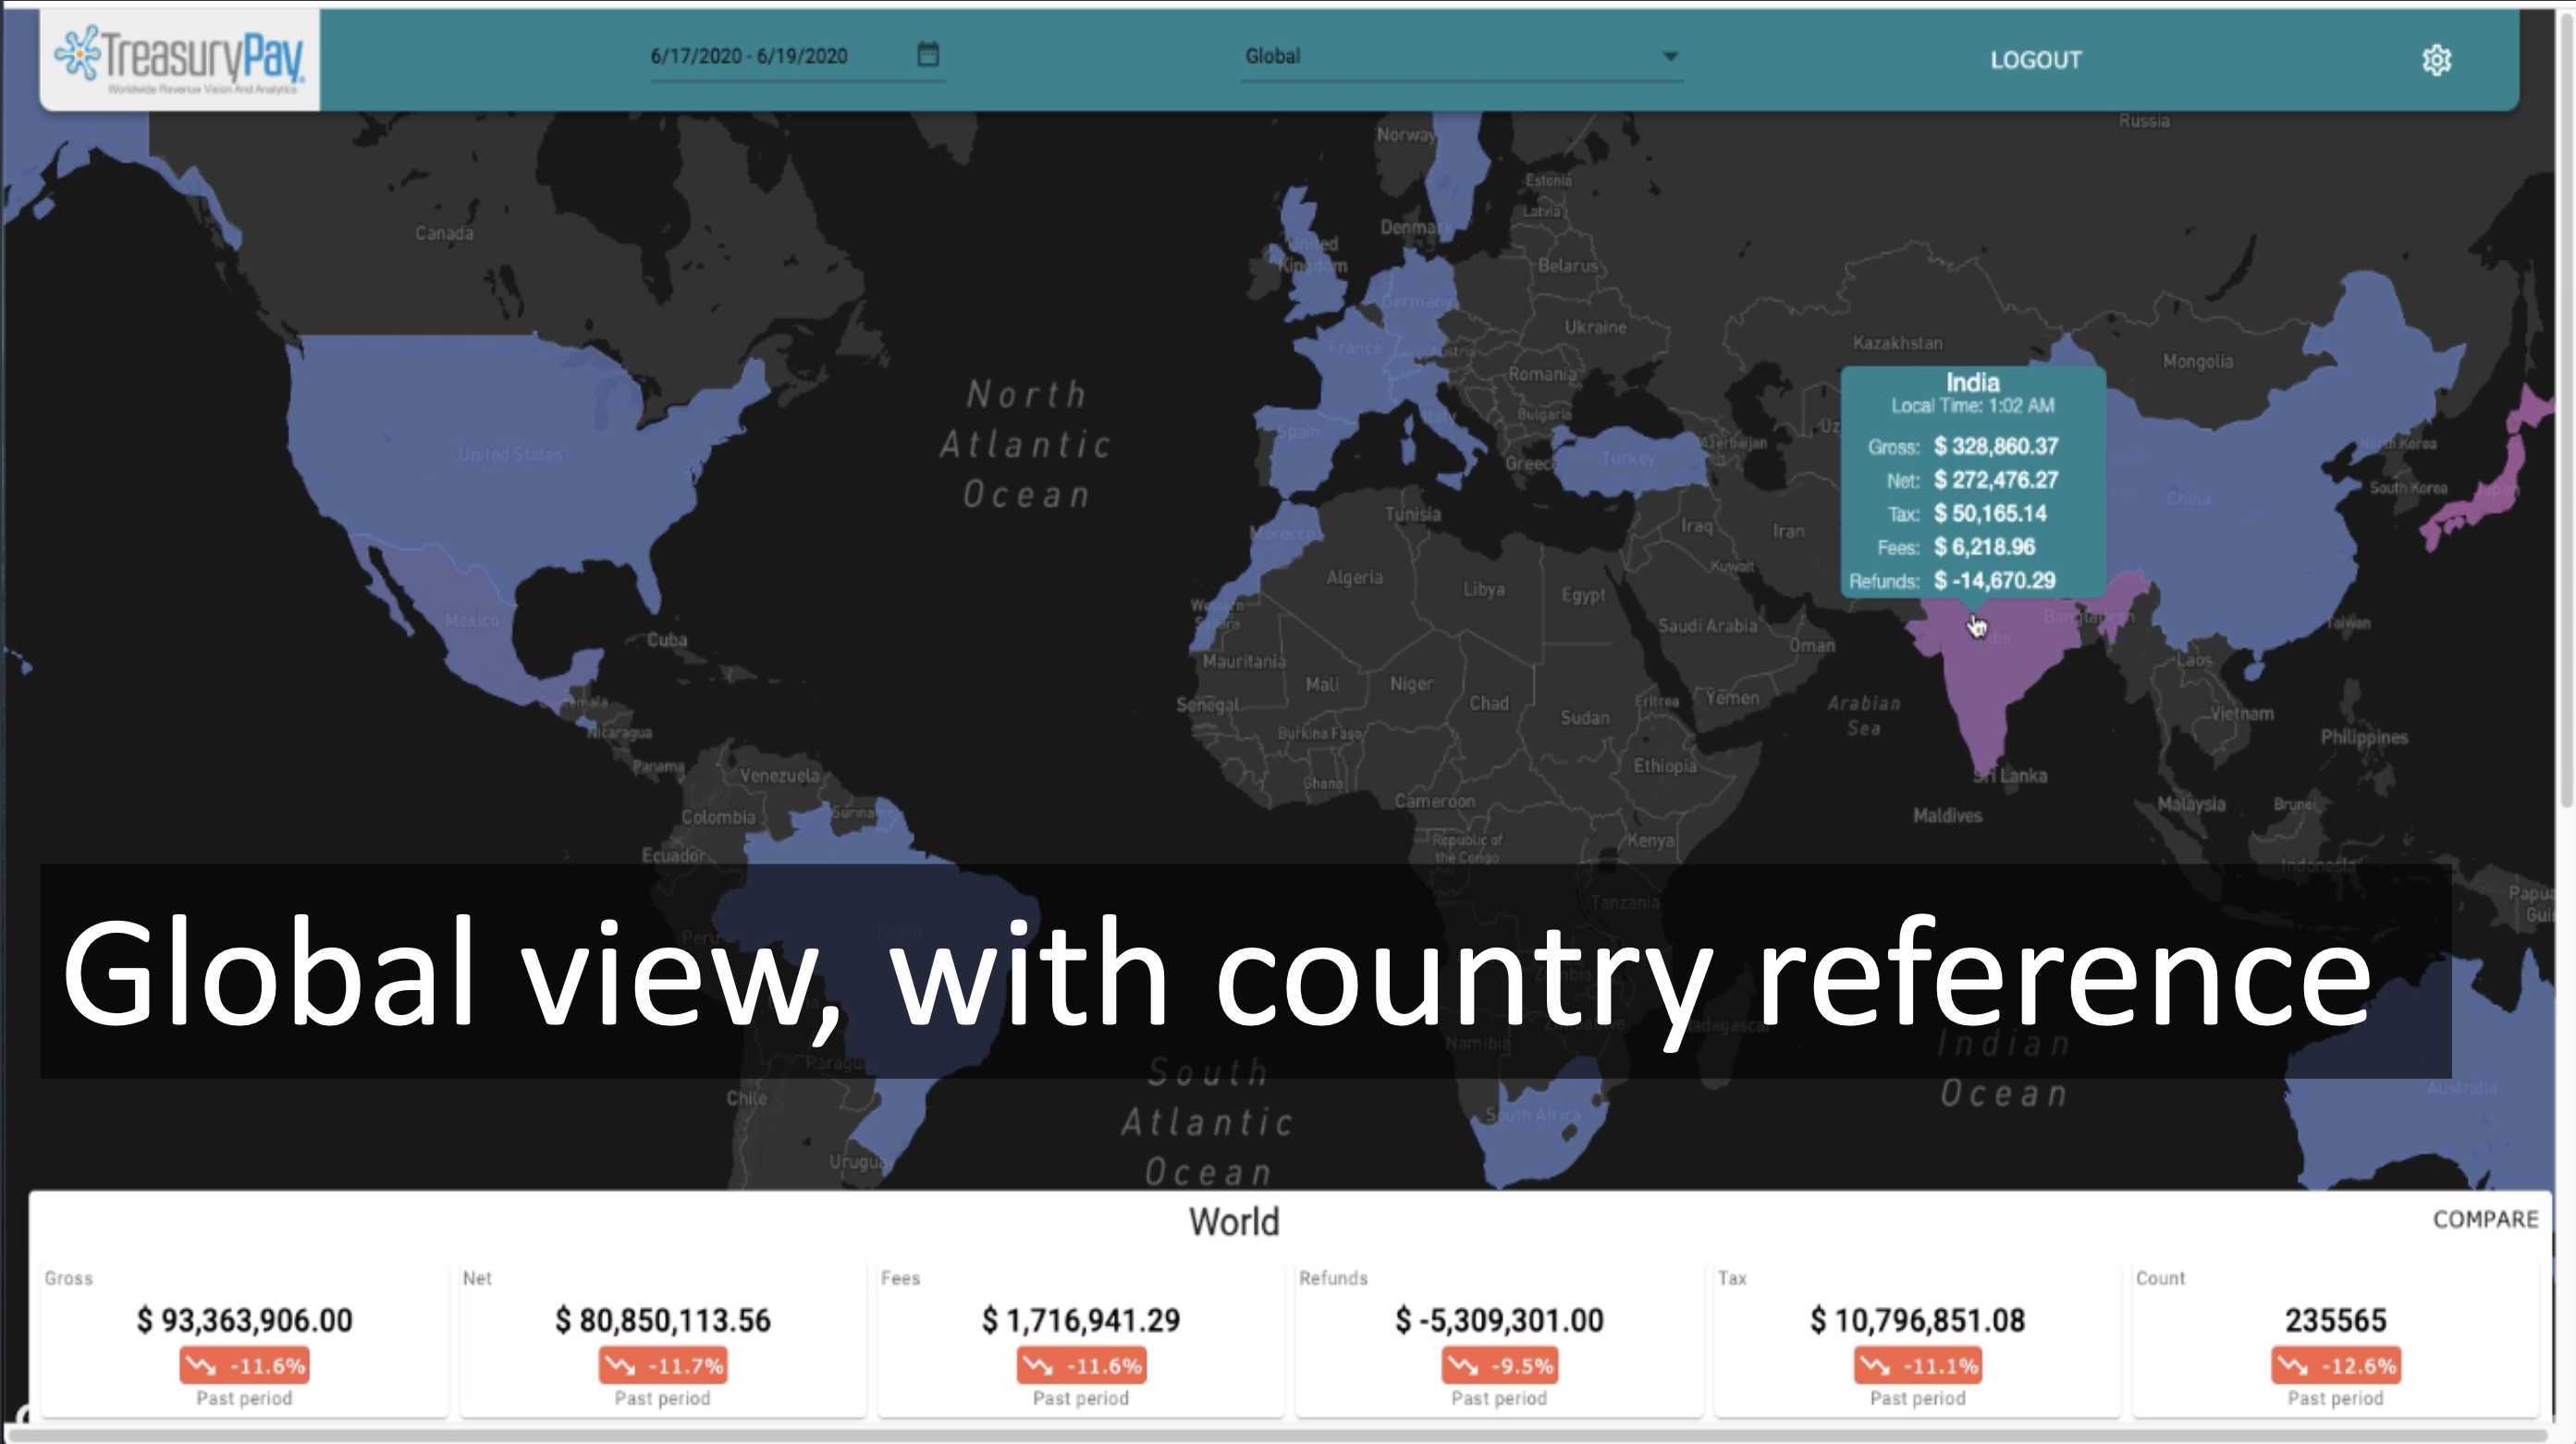 Global view with country reference